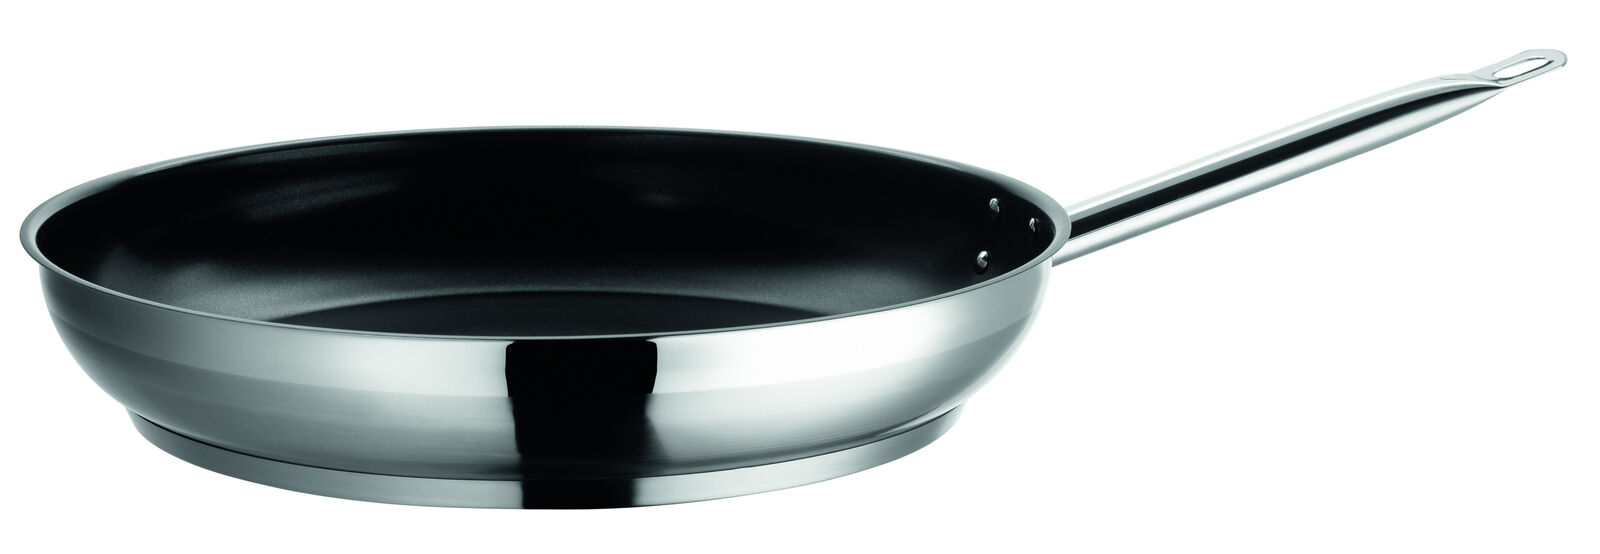 Mäser 36 High quality cminduktionedelstahl 18 10 Professional 36cm Directly managed store Frying Pan